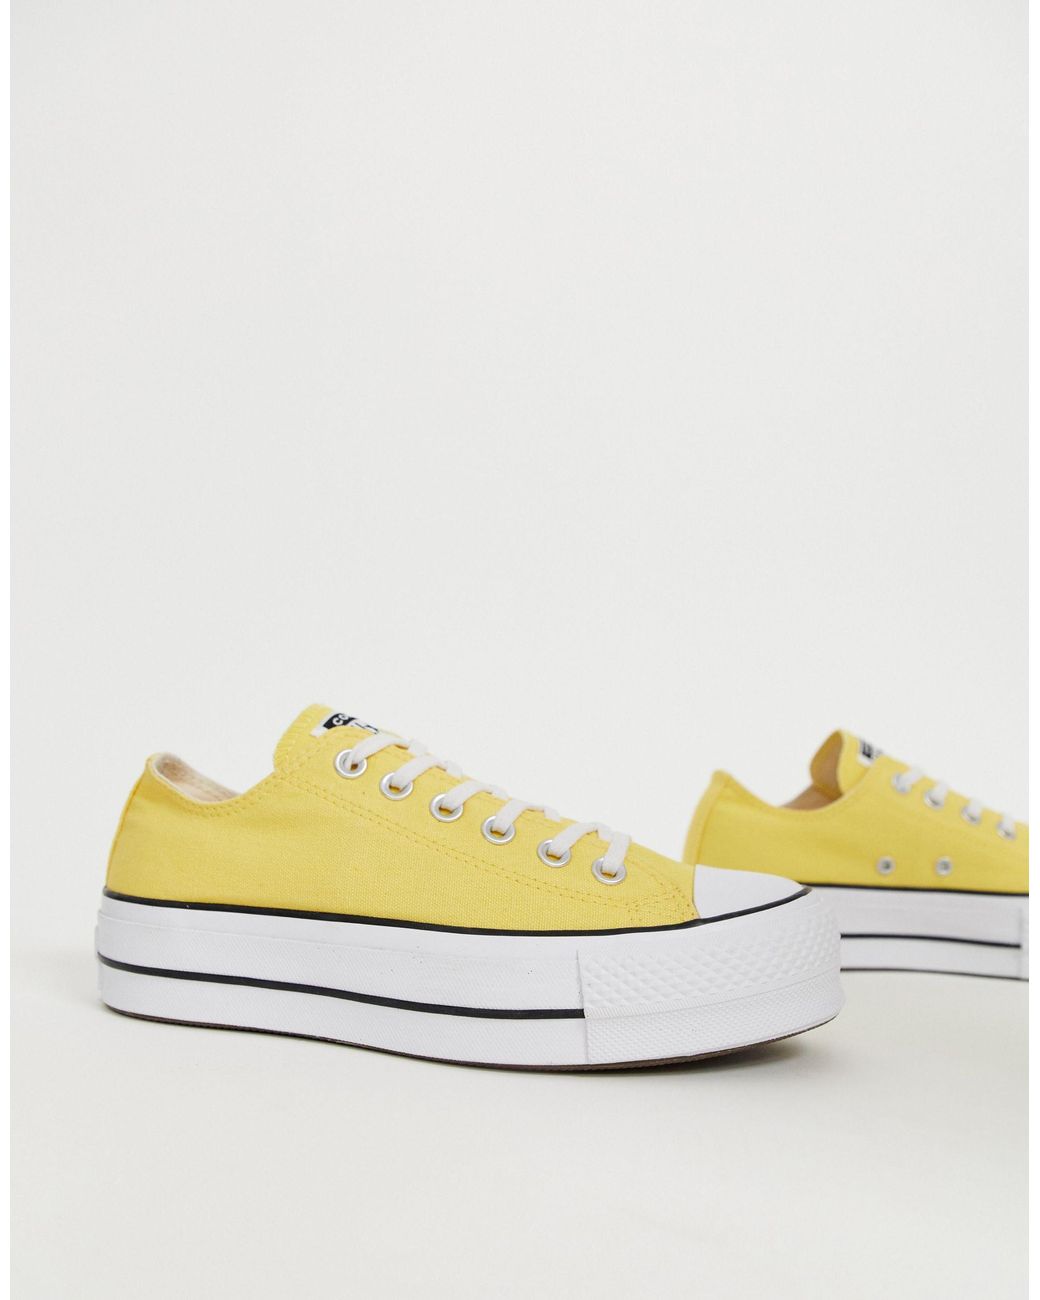 Converse Canvas Chuck Taylor All Star Lo Yellow Platform Trainers | Lyst